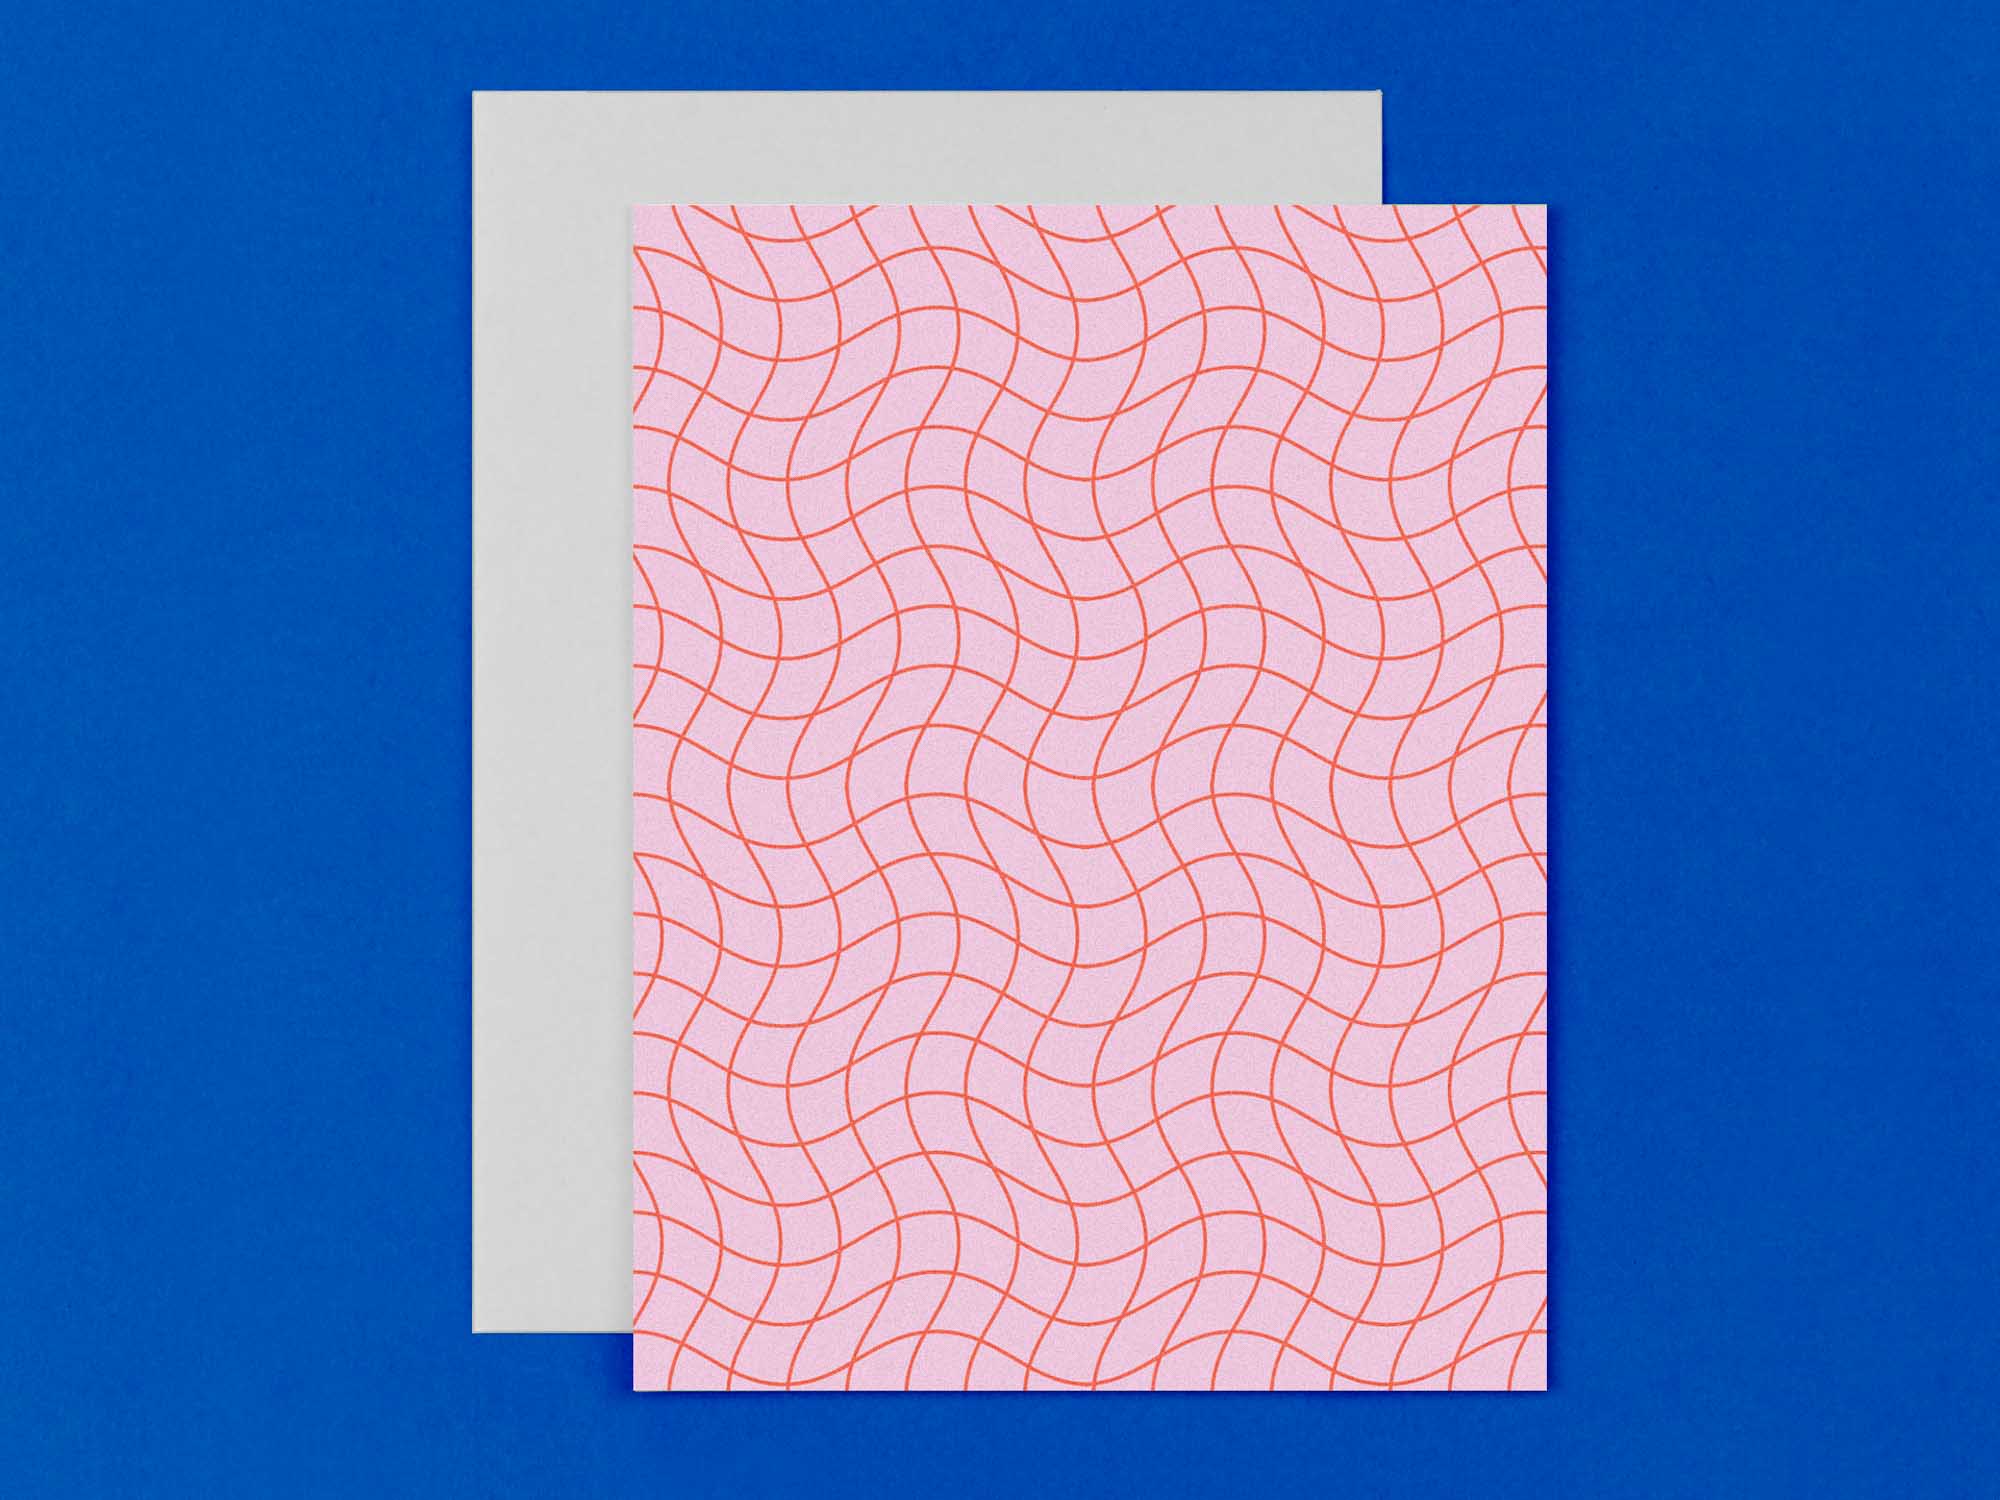 Red and Pink Wavy Grid. Set of 8 checker and grid pattern assorted blank greeting cards that bend space and time. Made in USA by @mydarlin_bk